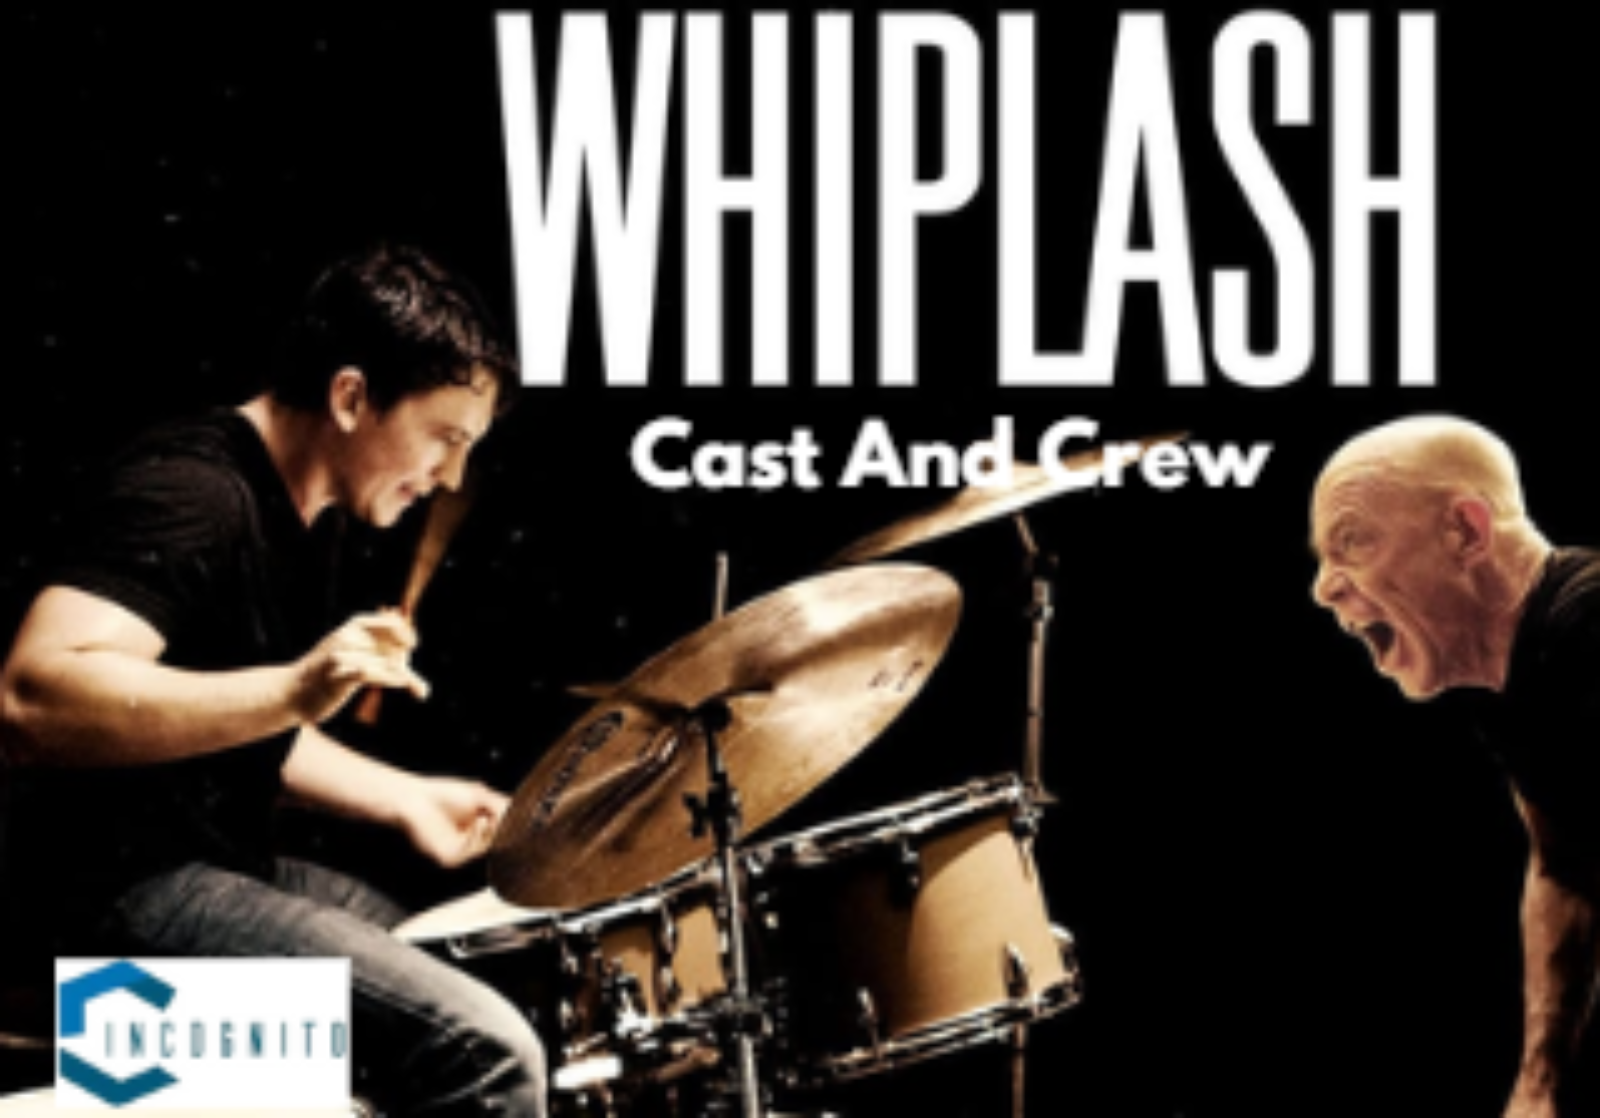 Whiplash Cast And Crew: Know About The Lead Actors And The Creators Of This 2014 Masterpiece